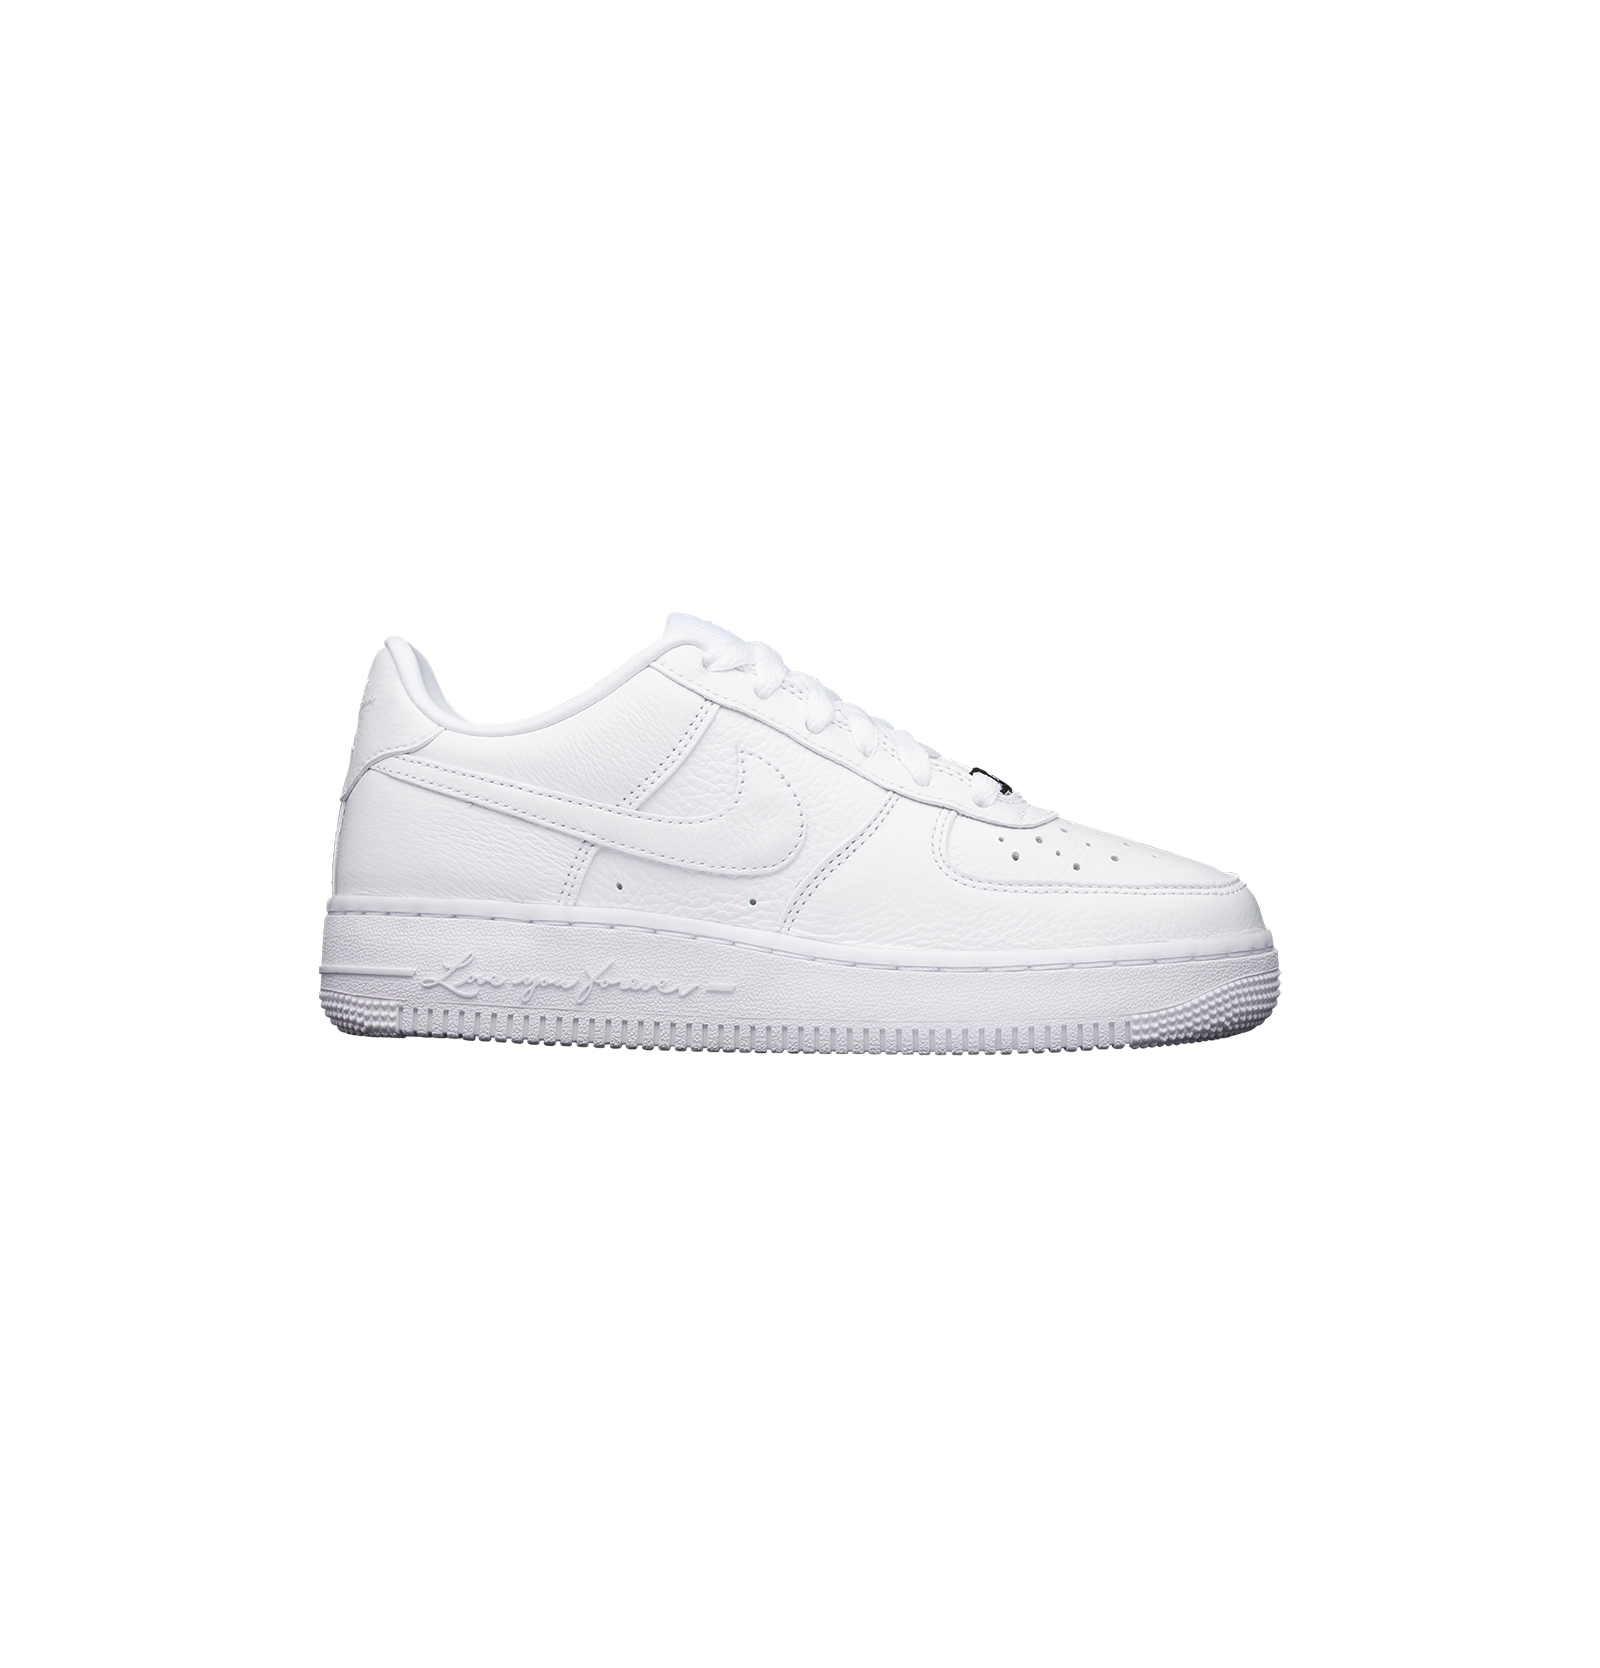 LOVE YOU FOREVER AIR FORCE 1 - BIG KIDS - IMAGE 6